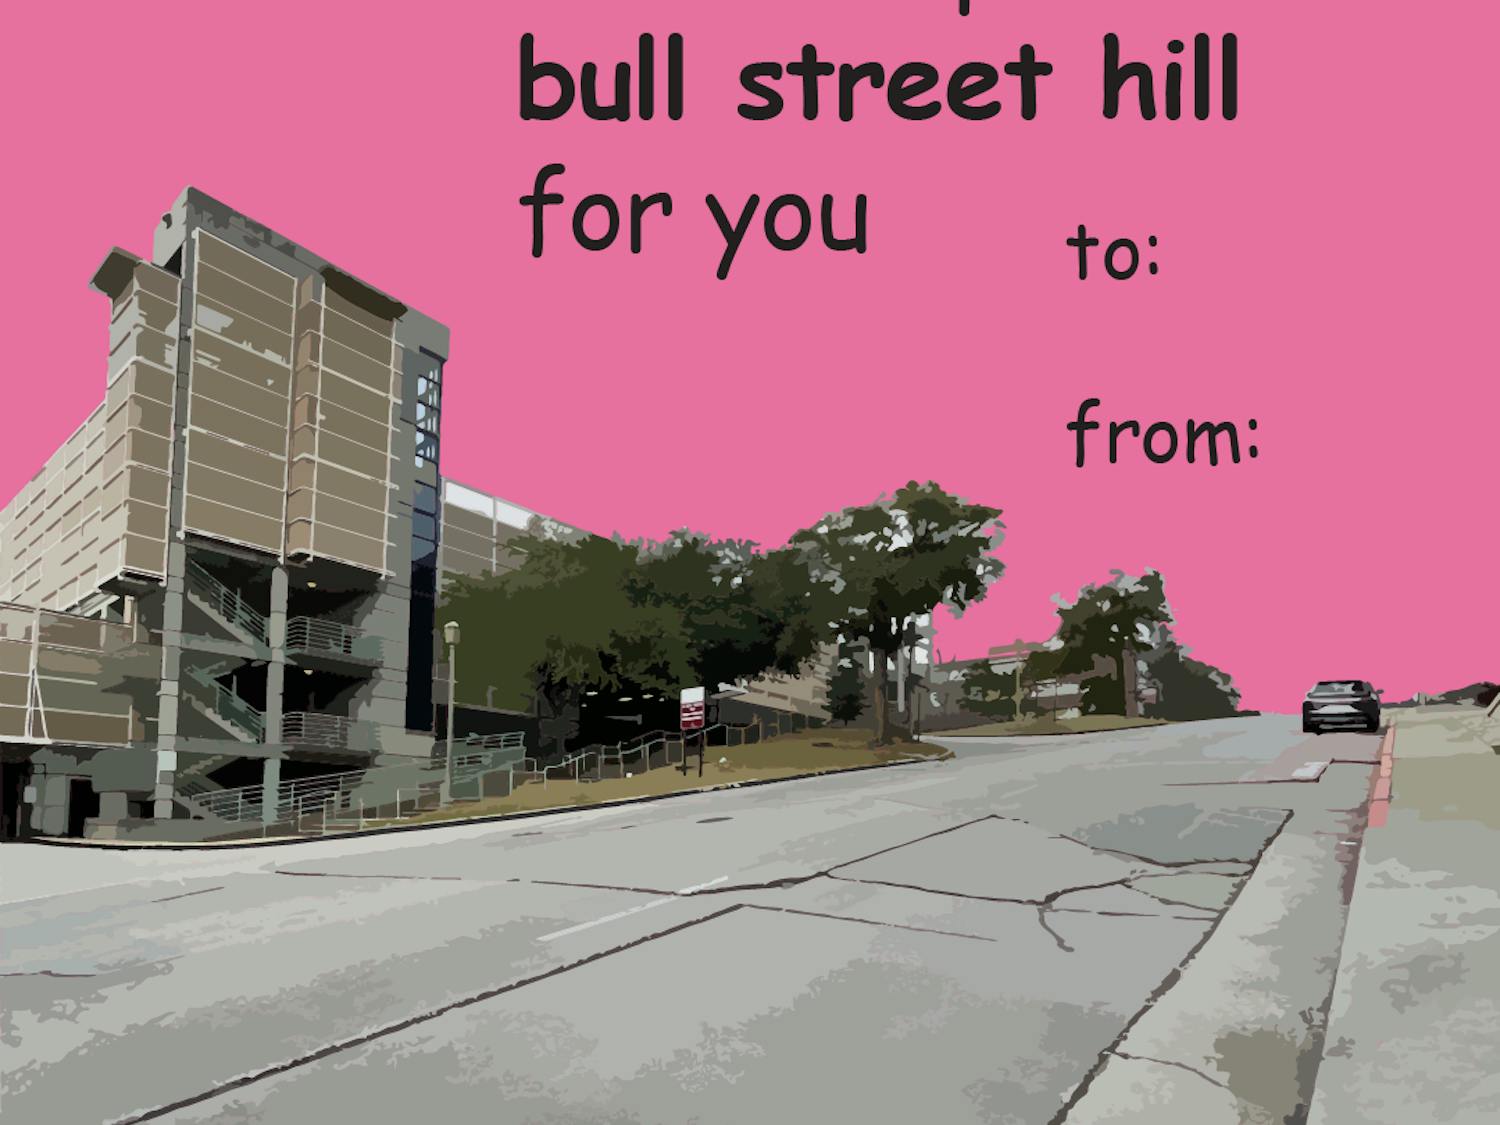 The Daily Gamecock made USC-related Valentine's Day cards to share with their loved ones and fellow Gamecocks.